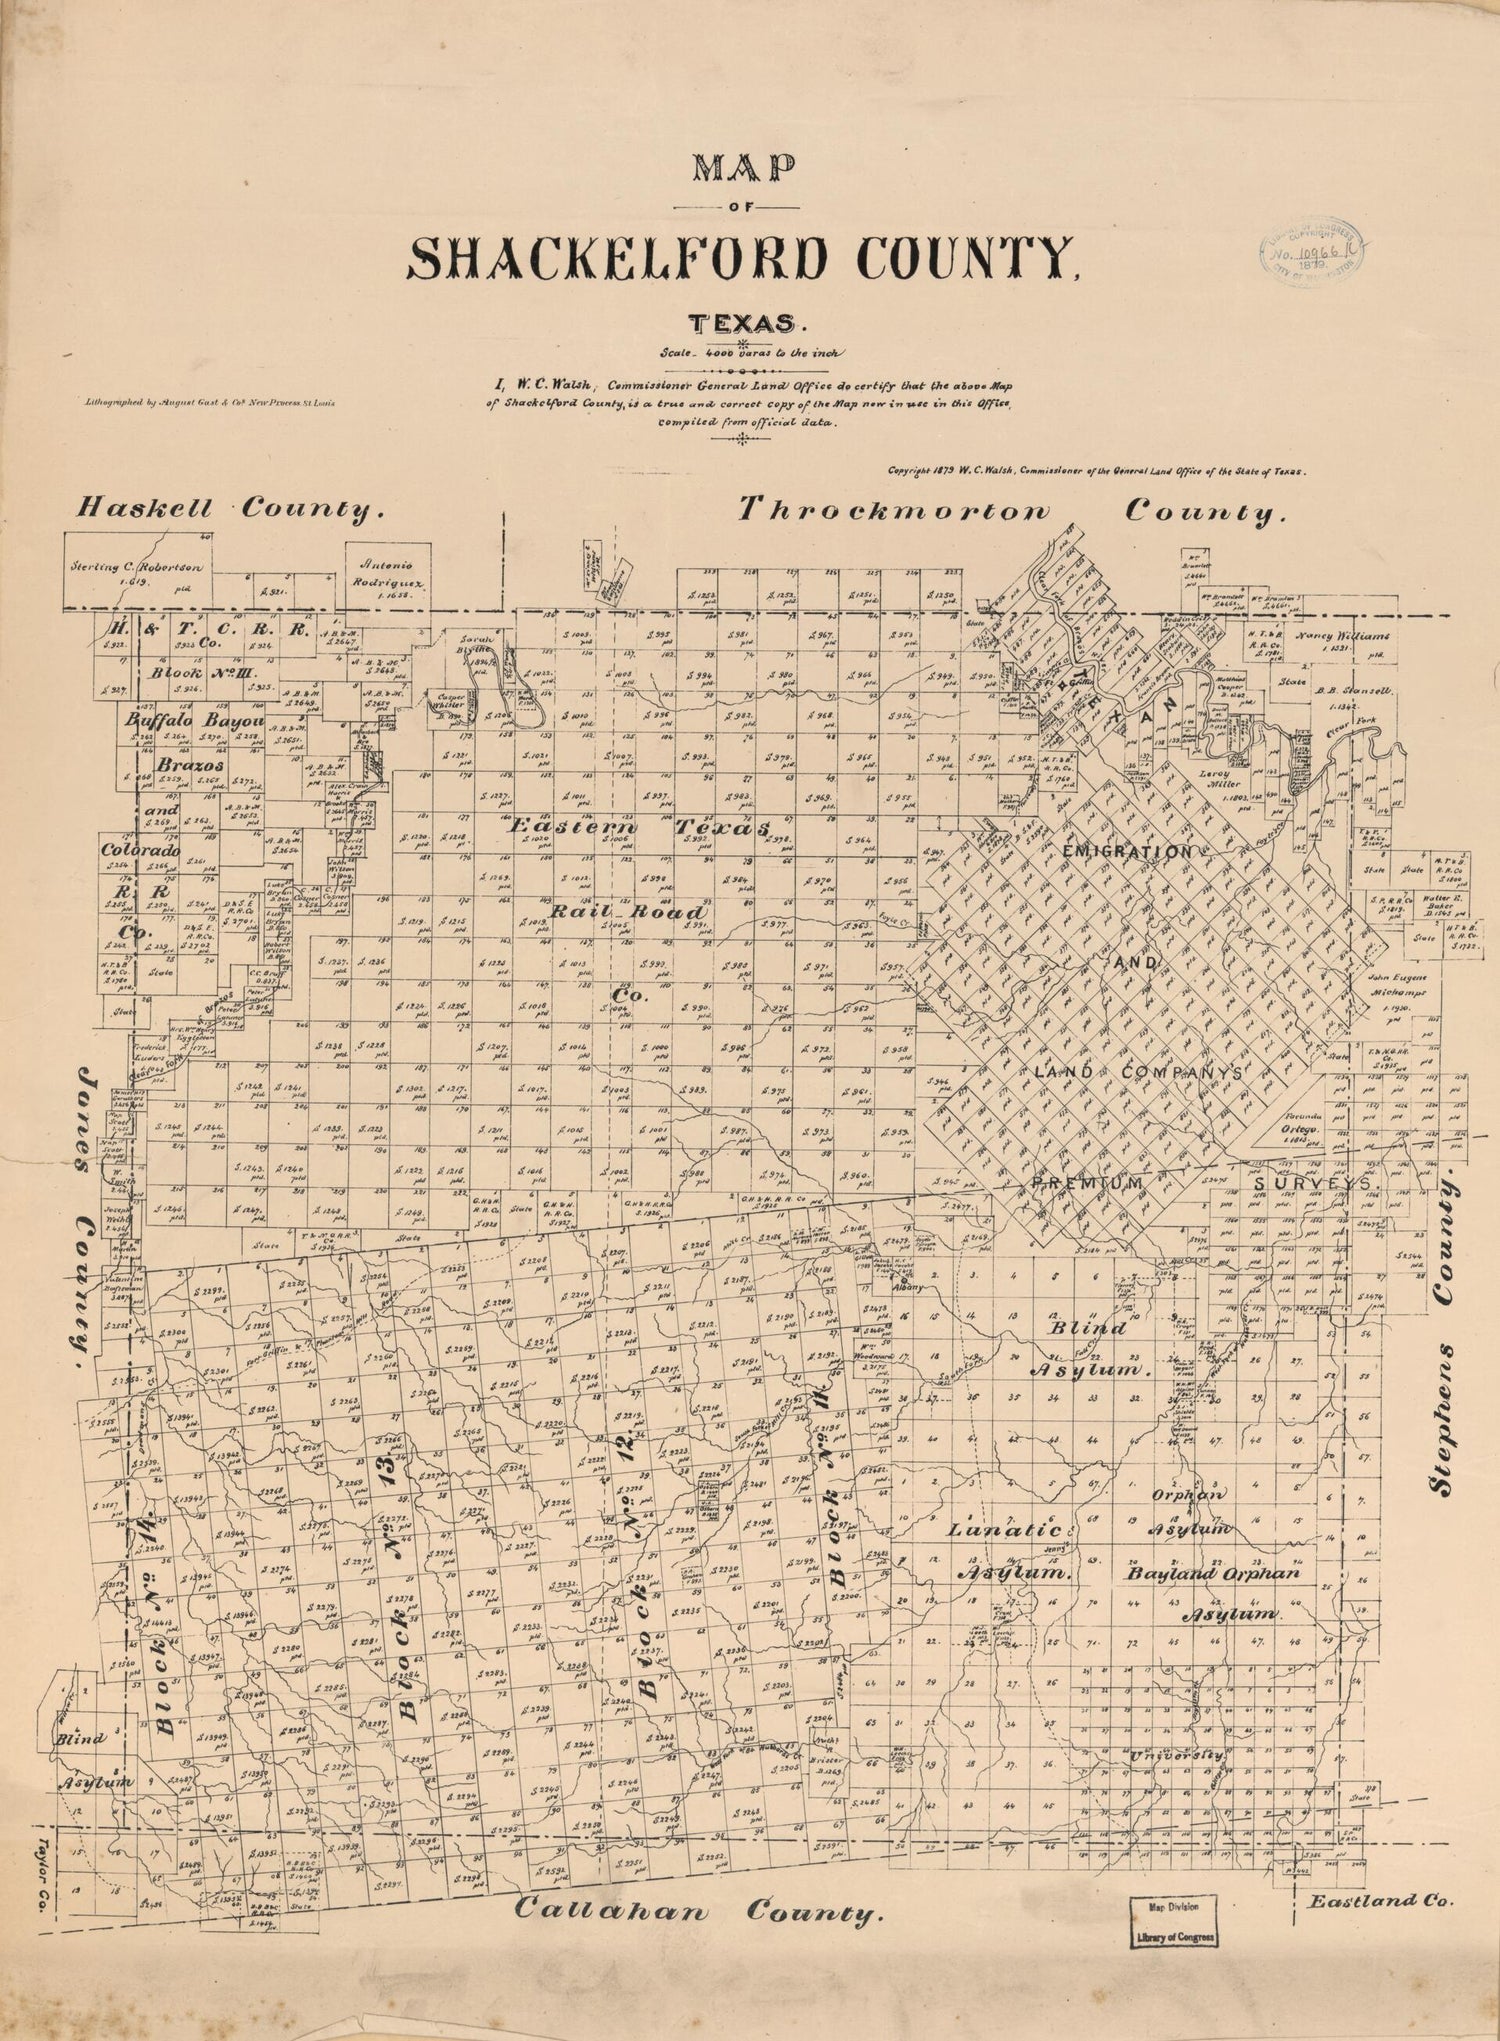 This old map of Map of Shackelford County, Texas from 1879 was created by  August Gast &amp; Co,  Texas. General Land Office, W. C. (William C.) Walsh in 1879